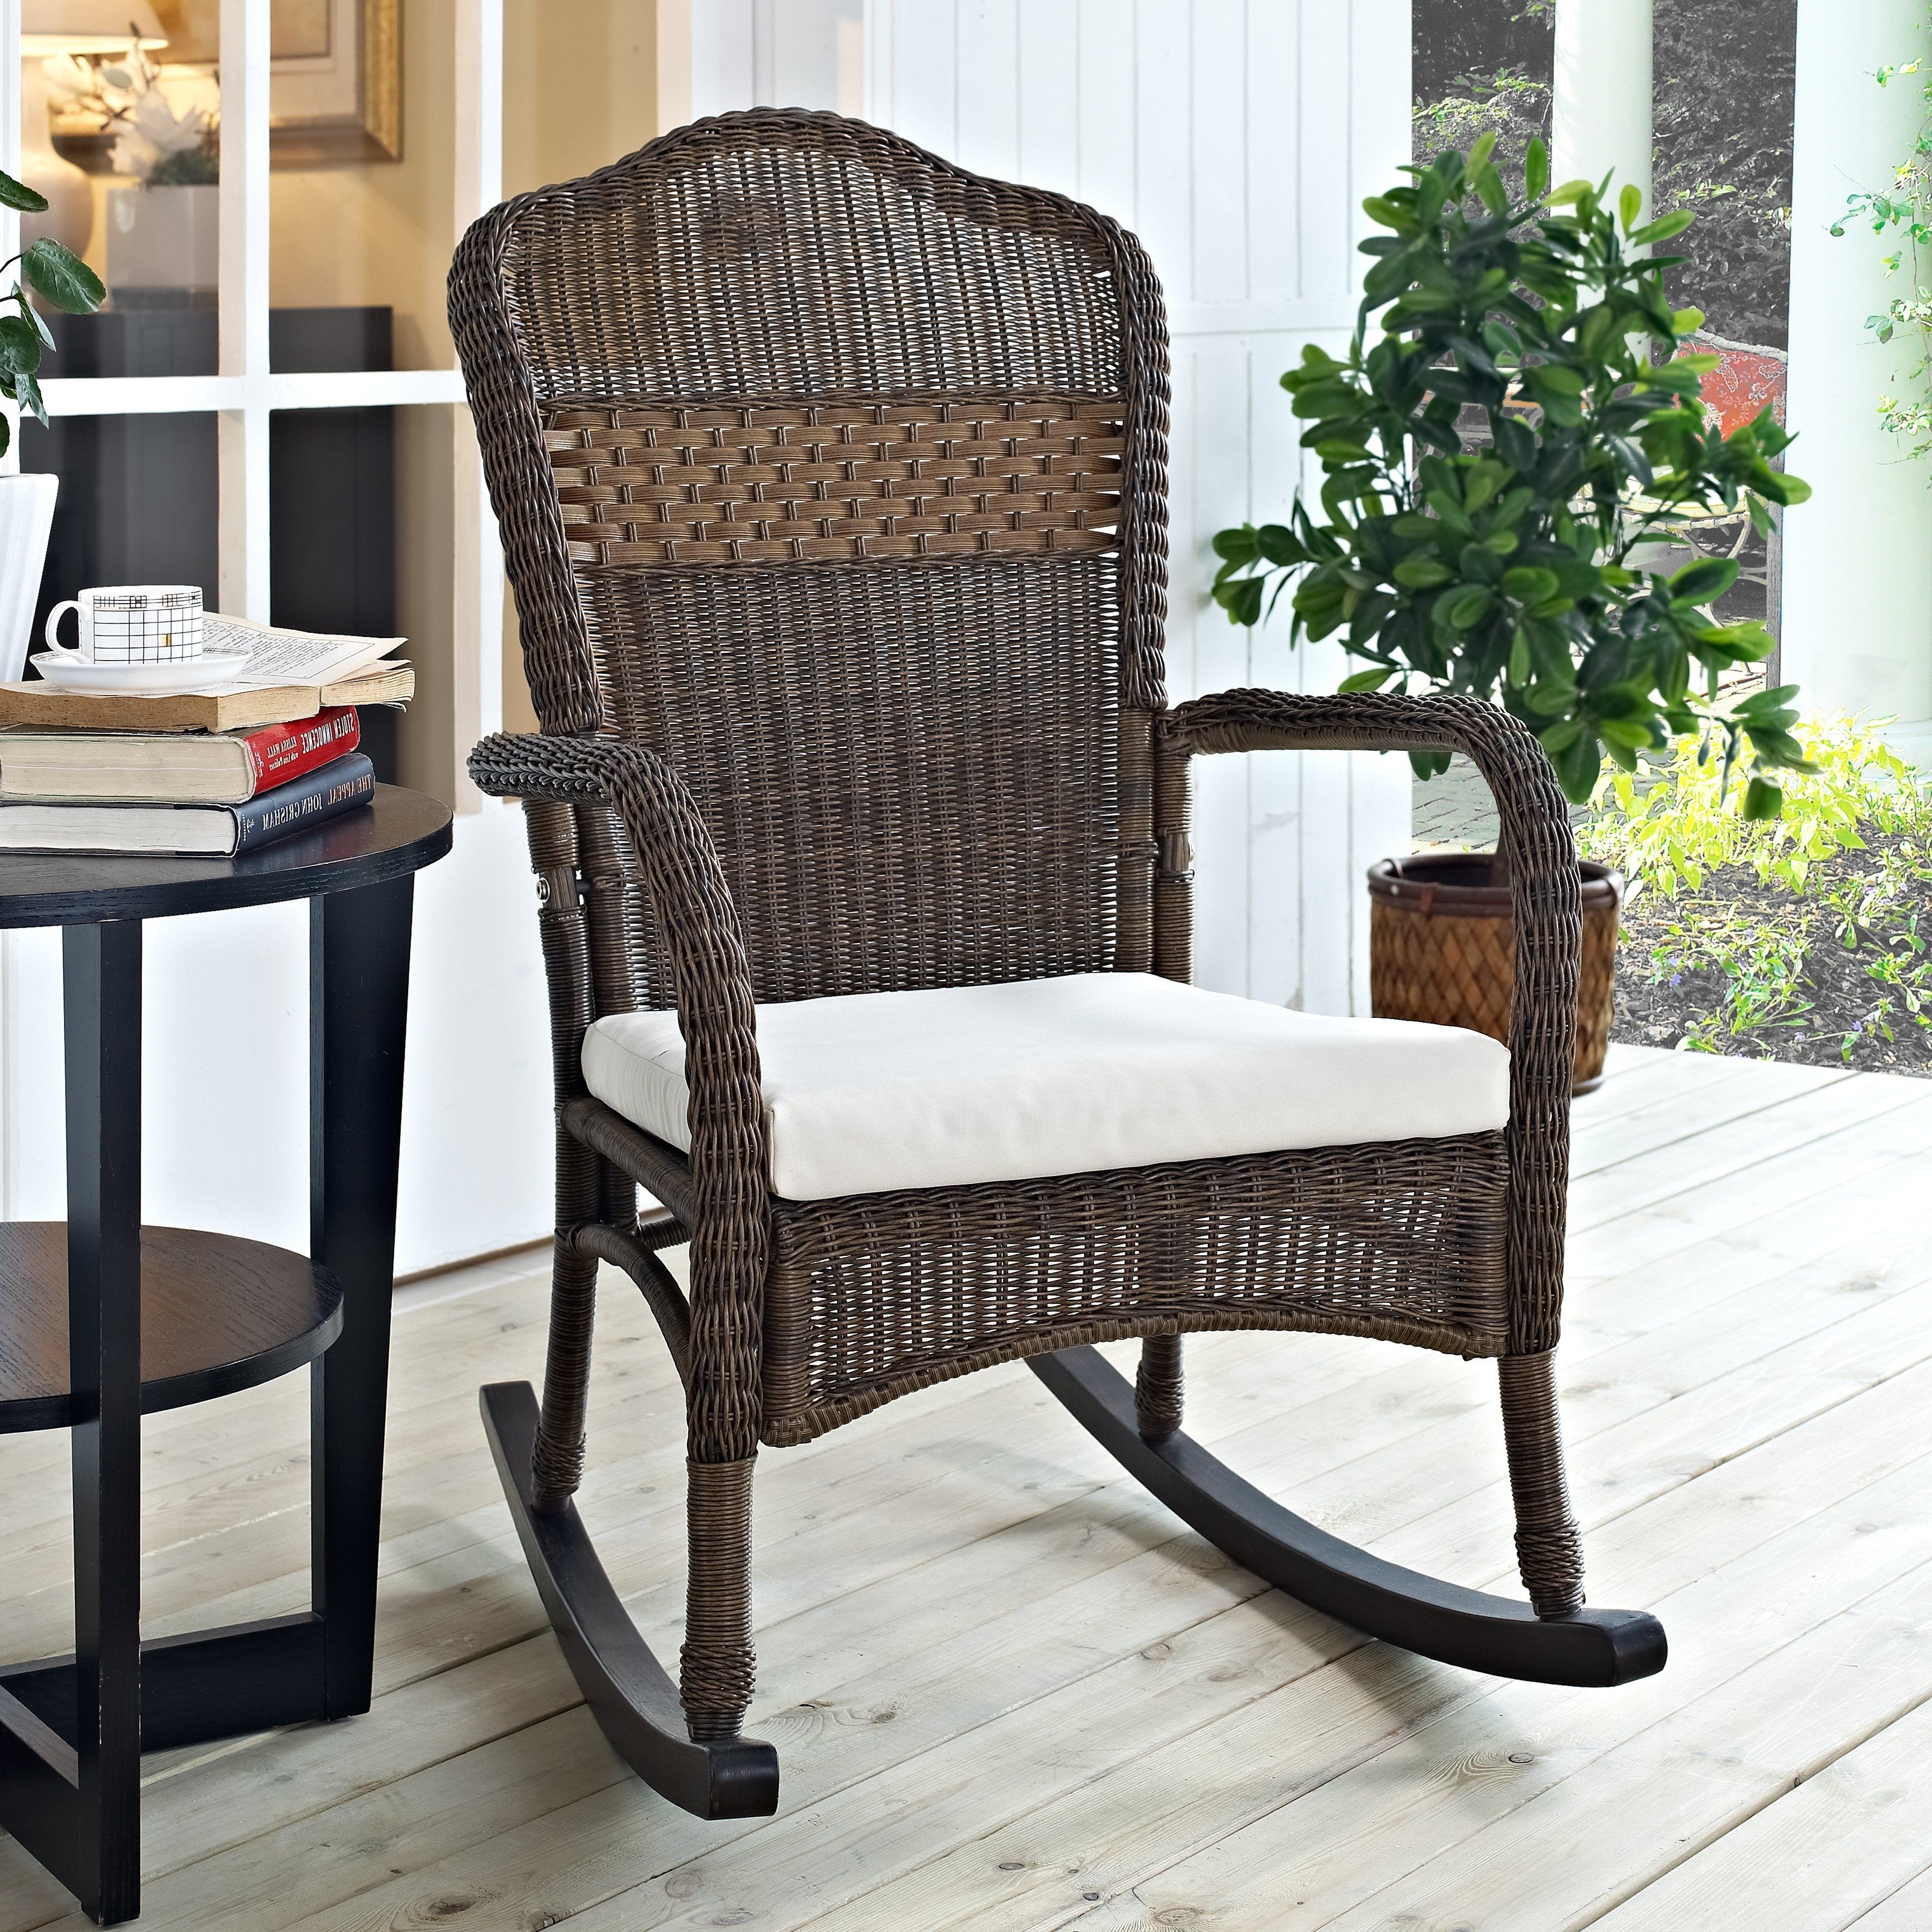 55 White Wicker Rocking Chair, 3 Pc Outdoor Patio Coastal White Intended For Fashionable White Wicker Rocking Chairs (Photo 13 of 15)